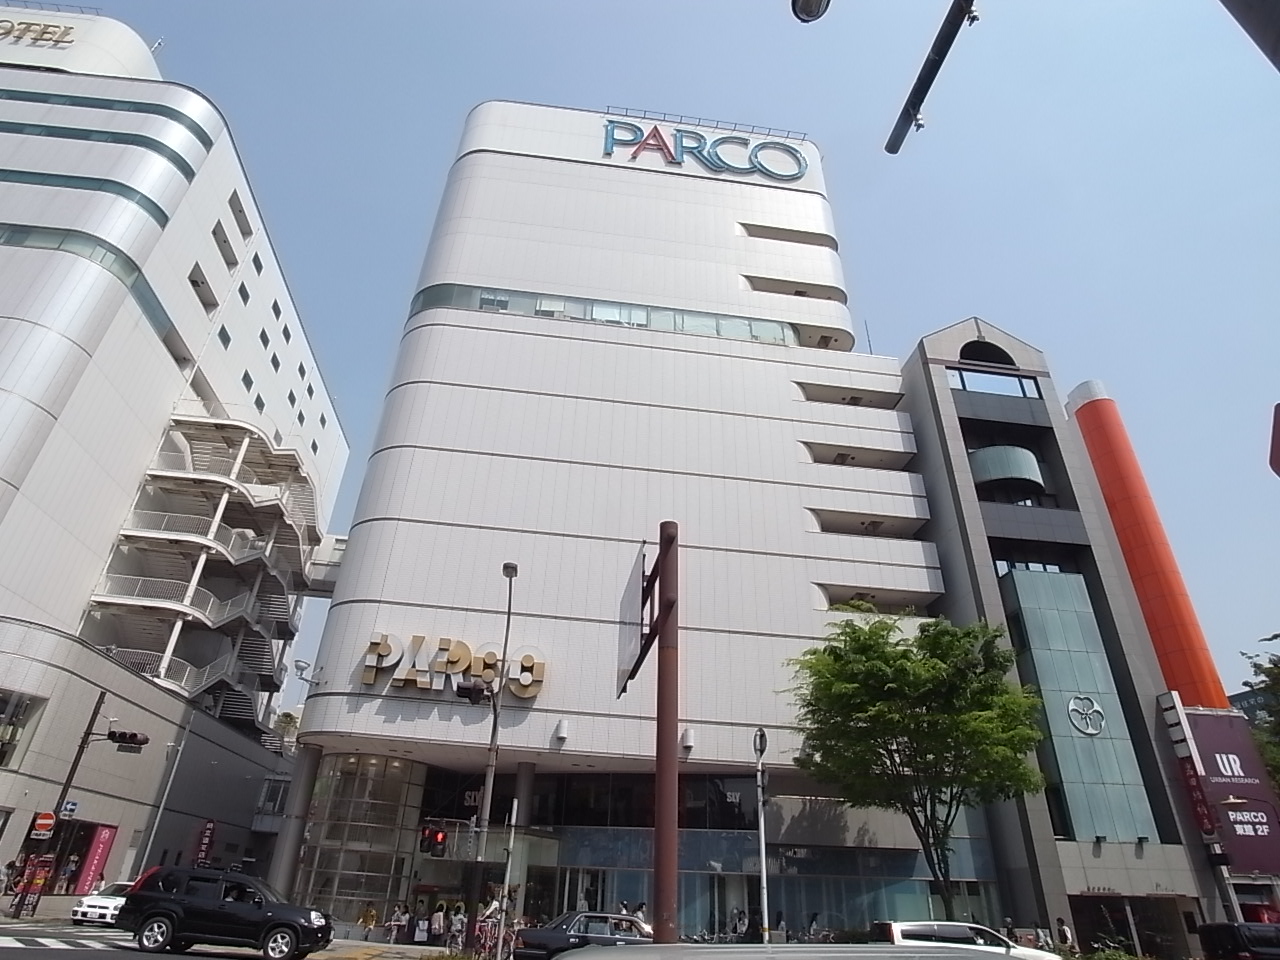 Shopping centre. 449m to Nagoya PARCO store (shopping center)